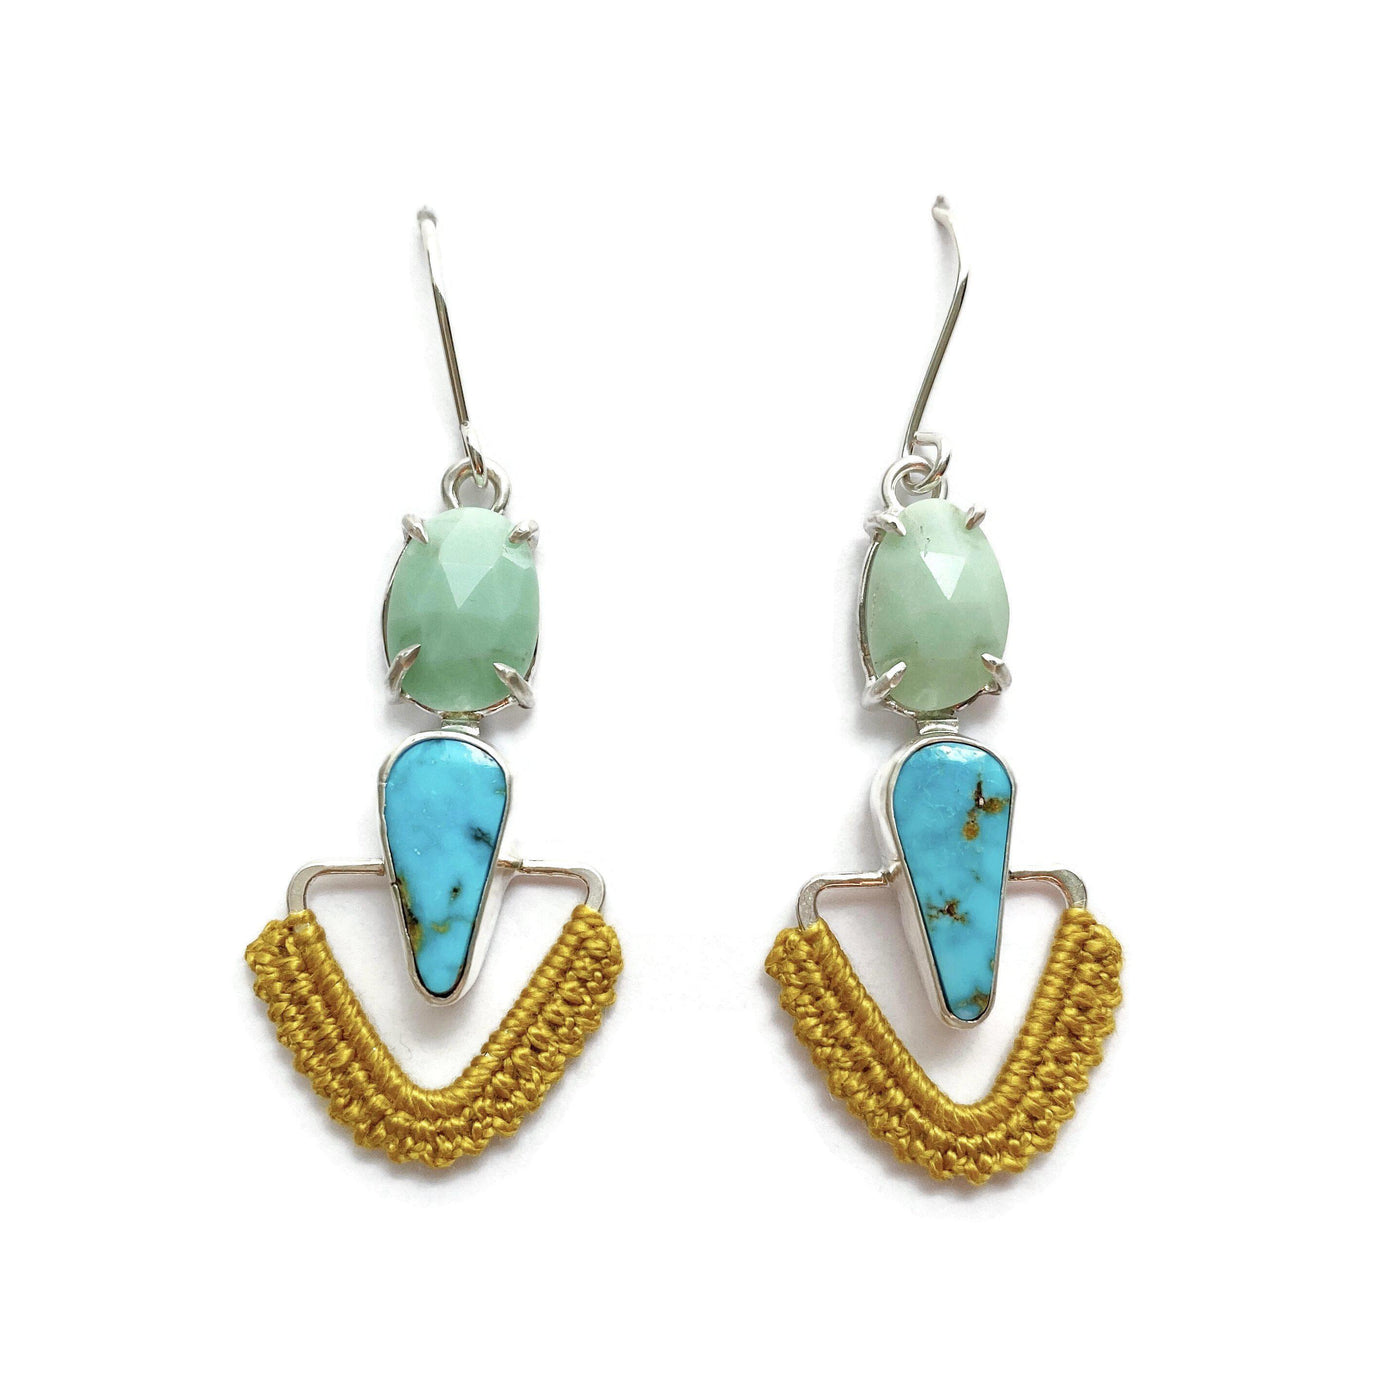 Pathway Earrings in Chrysoprase & Turquoise // One-of-a-Kind-Twyla Dill-Seattle Jewelry-Handmade Jewelry-Seattle Jeweler-Twyla Dill